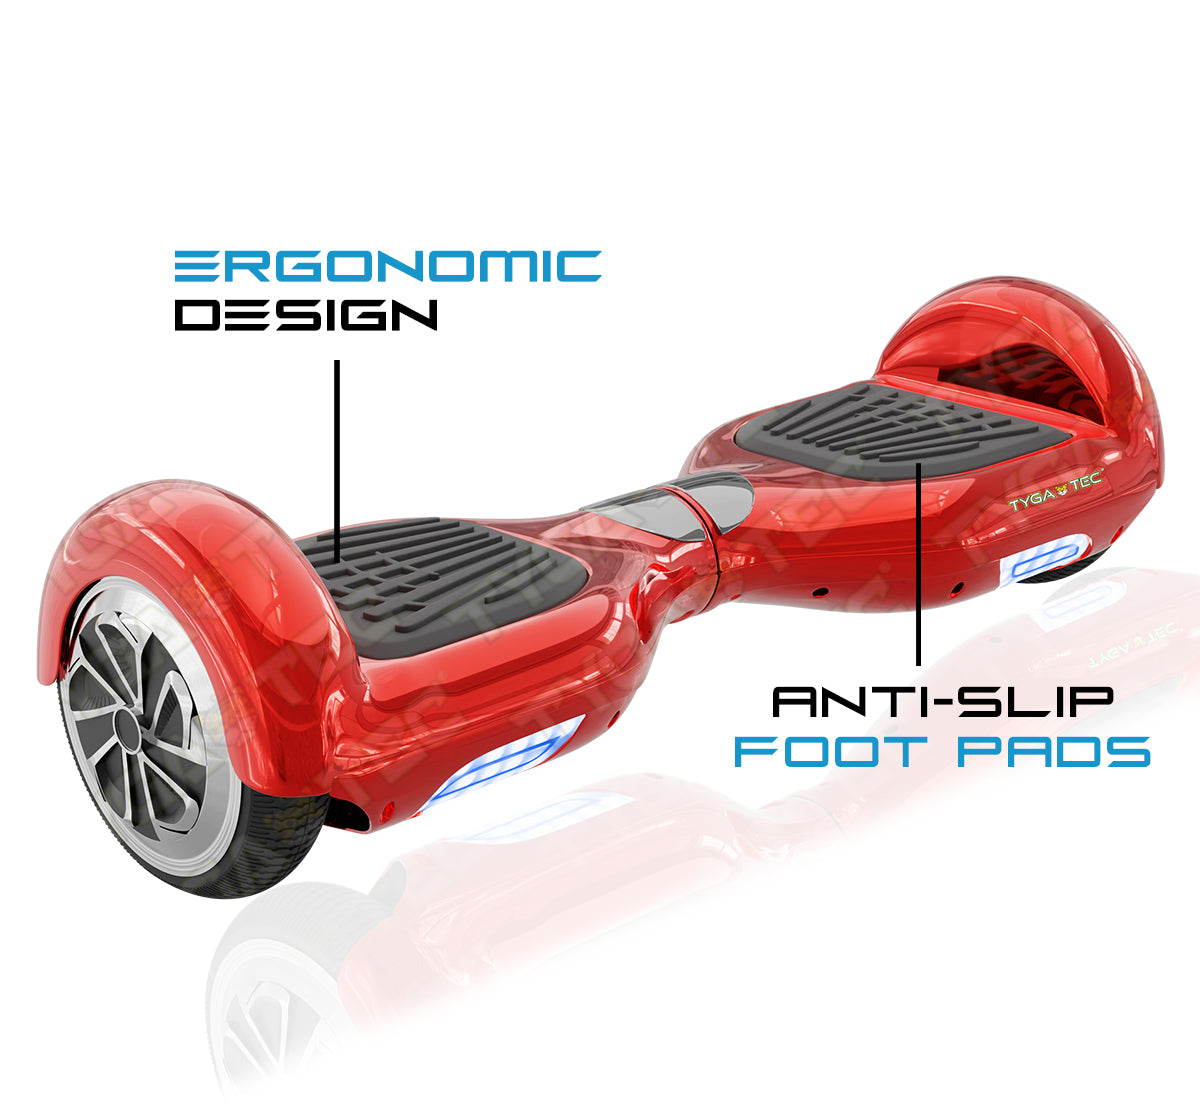 Tygatec T1 ECO - Self Balancing Electric Hoverboard (Red Color)